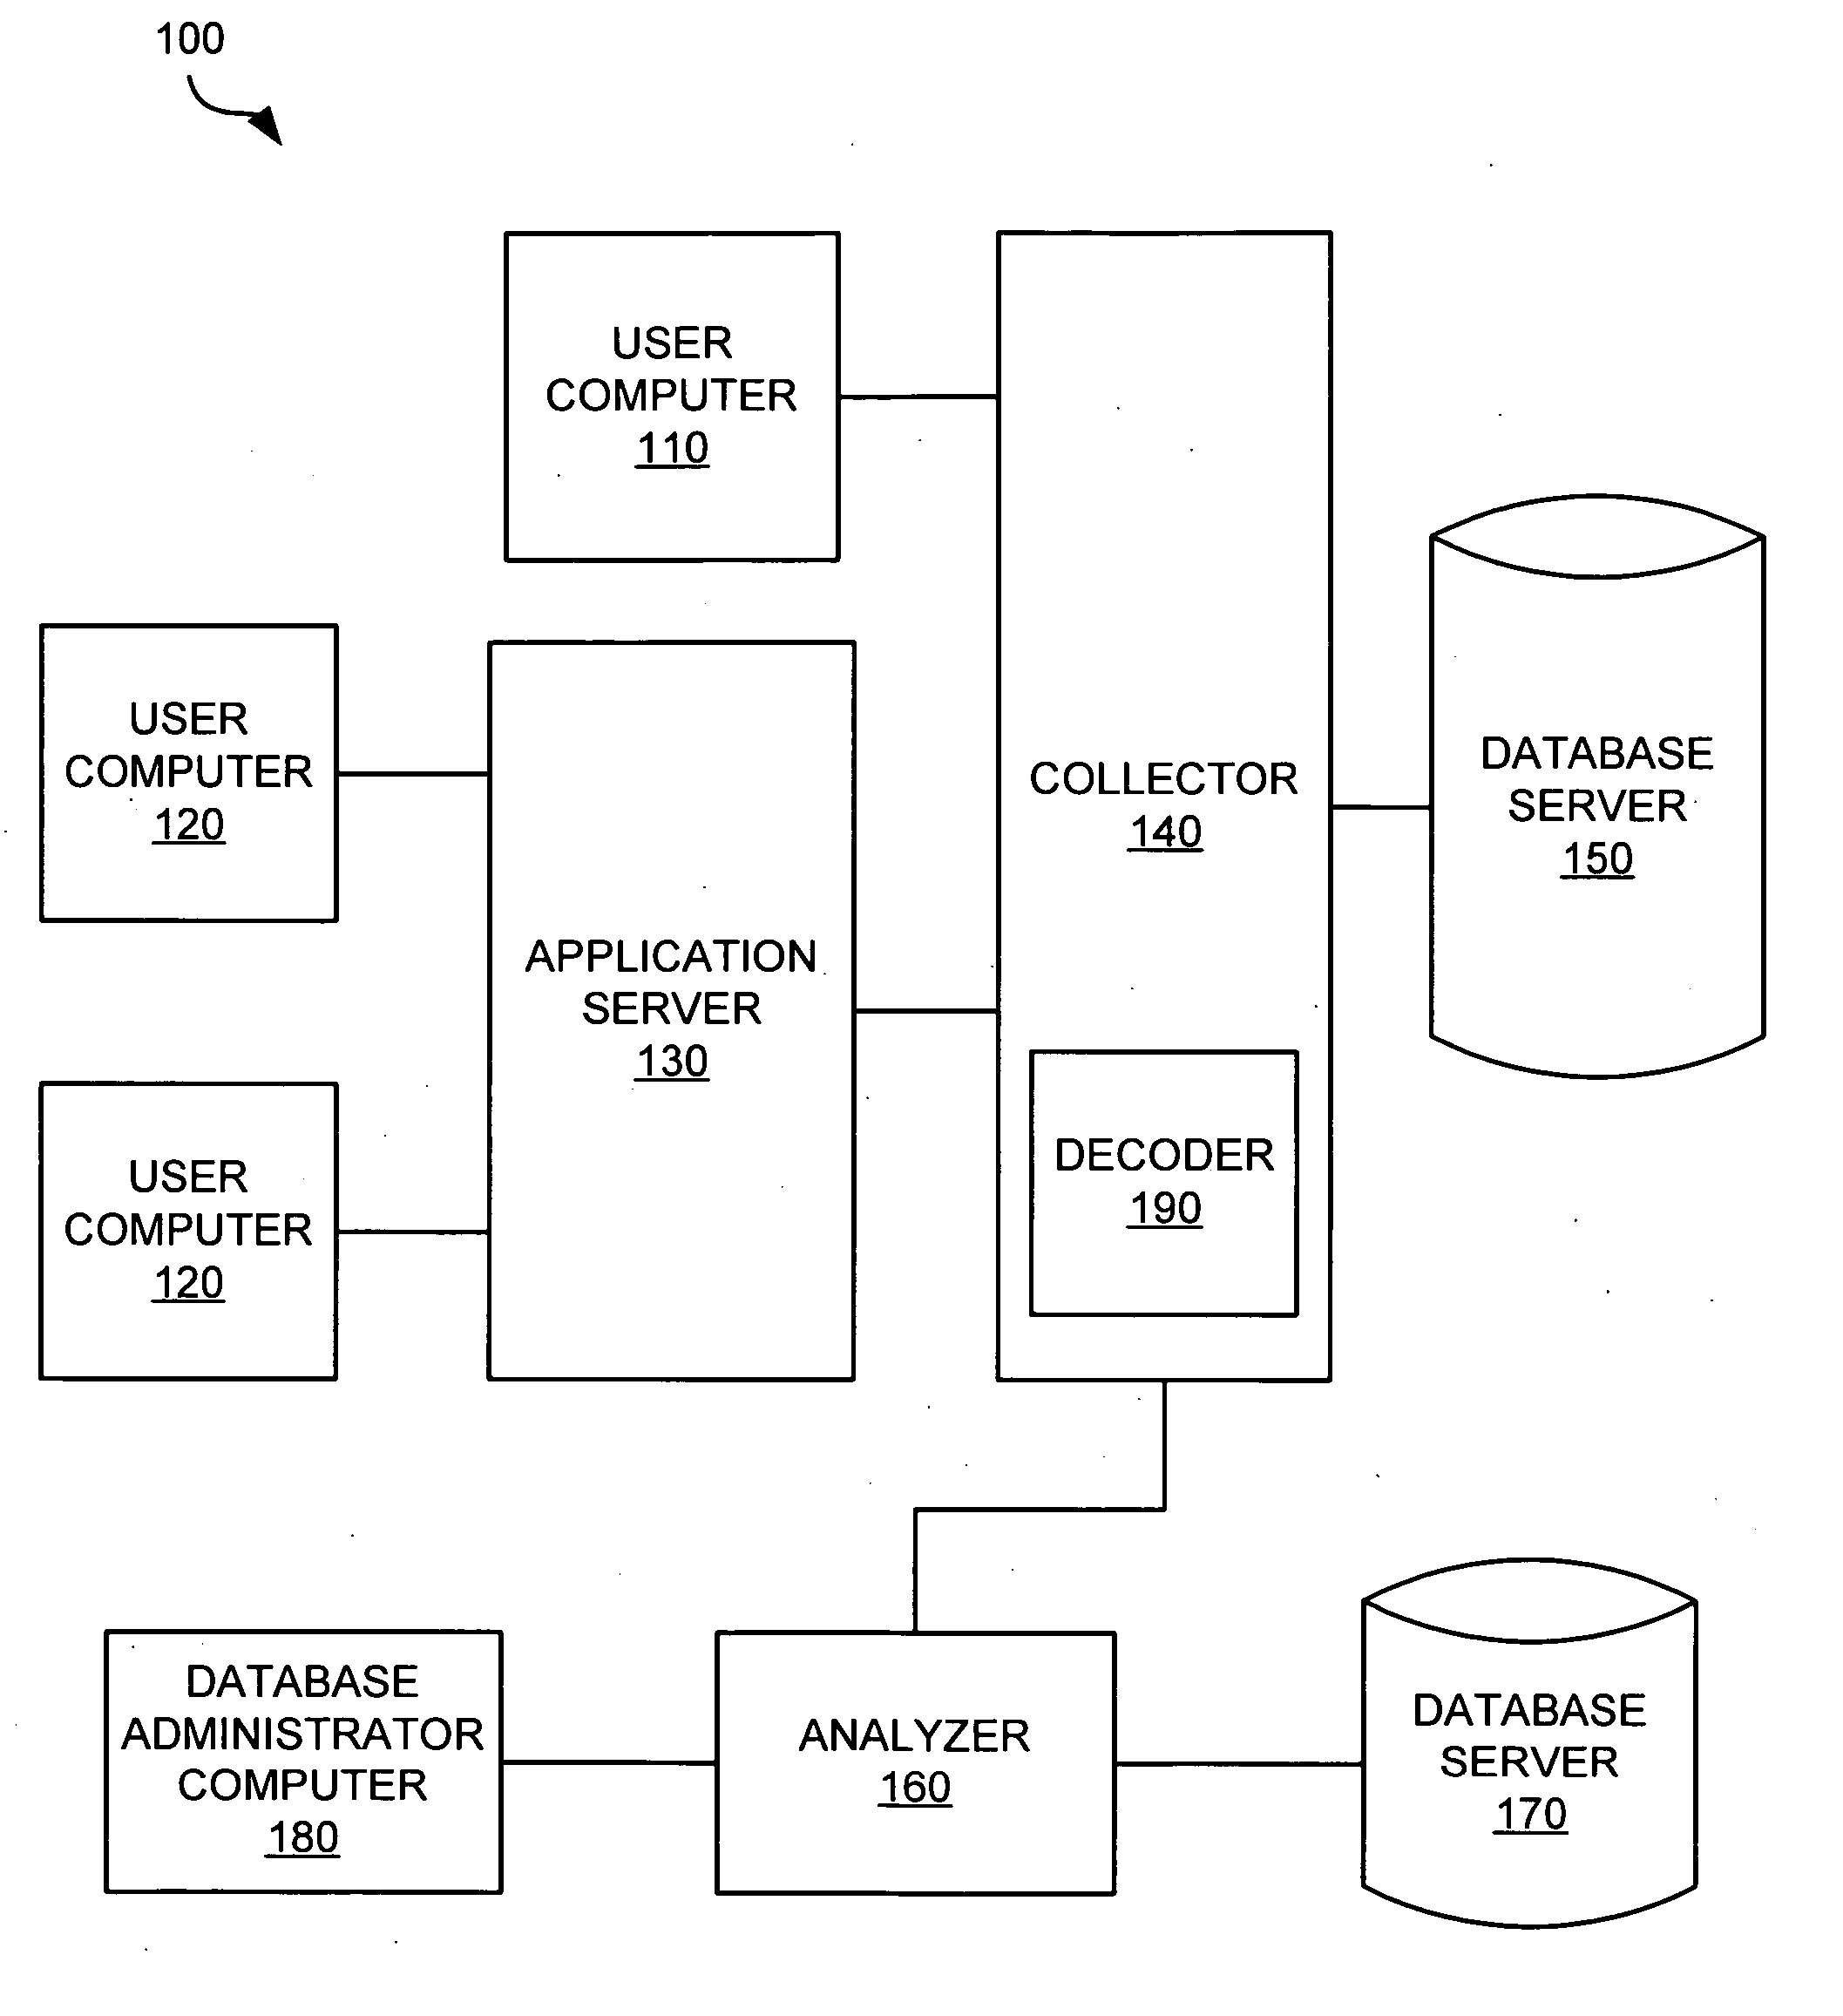 Generation of names related to organization actions